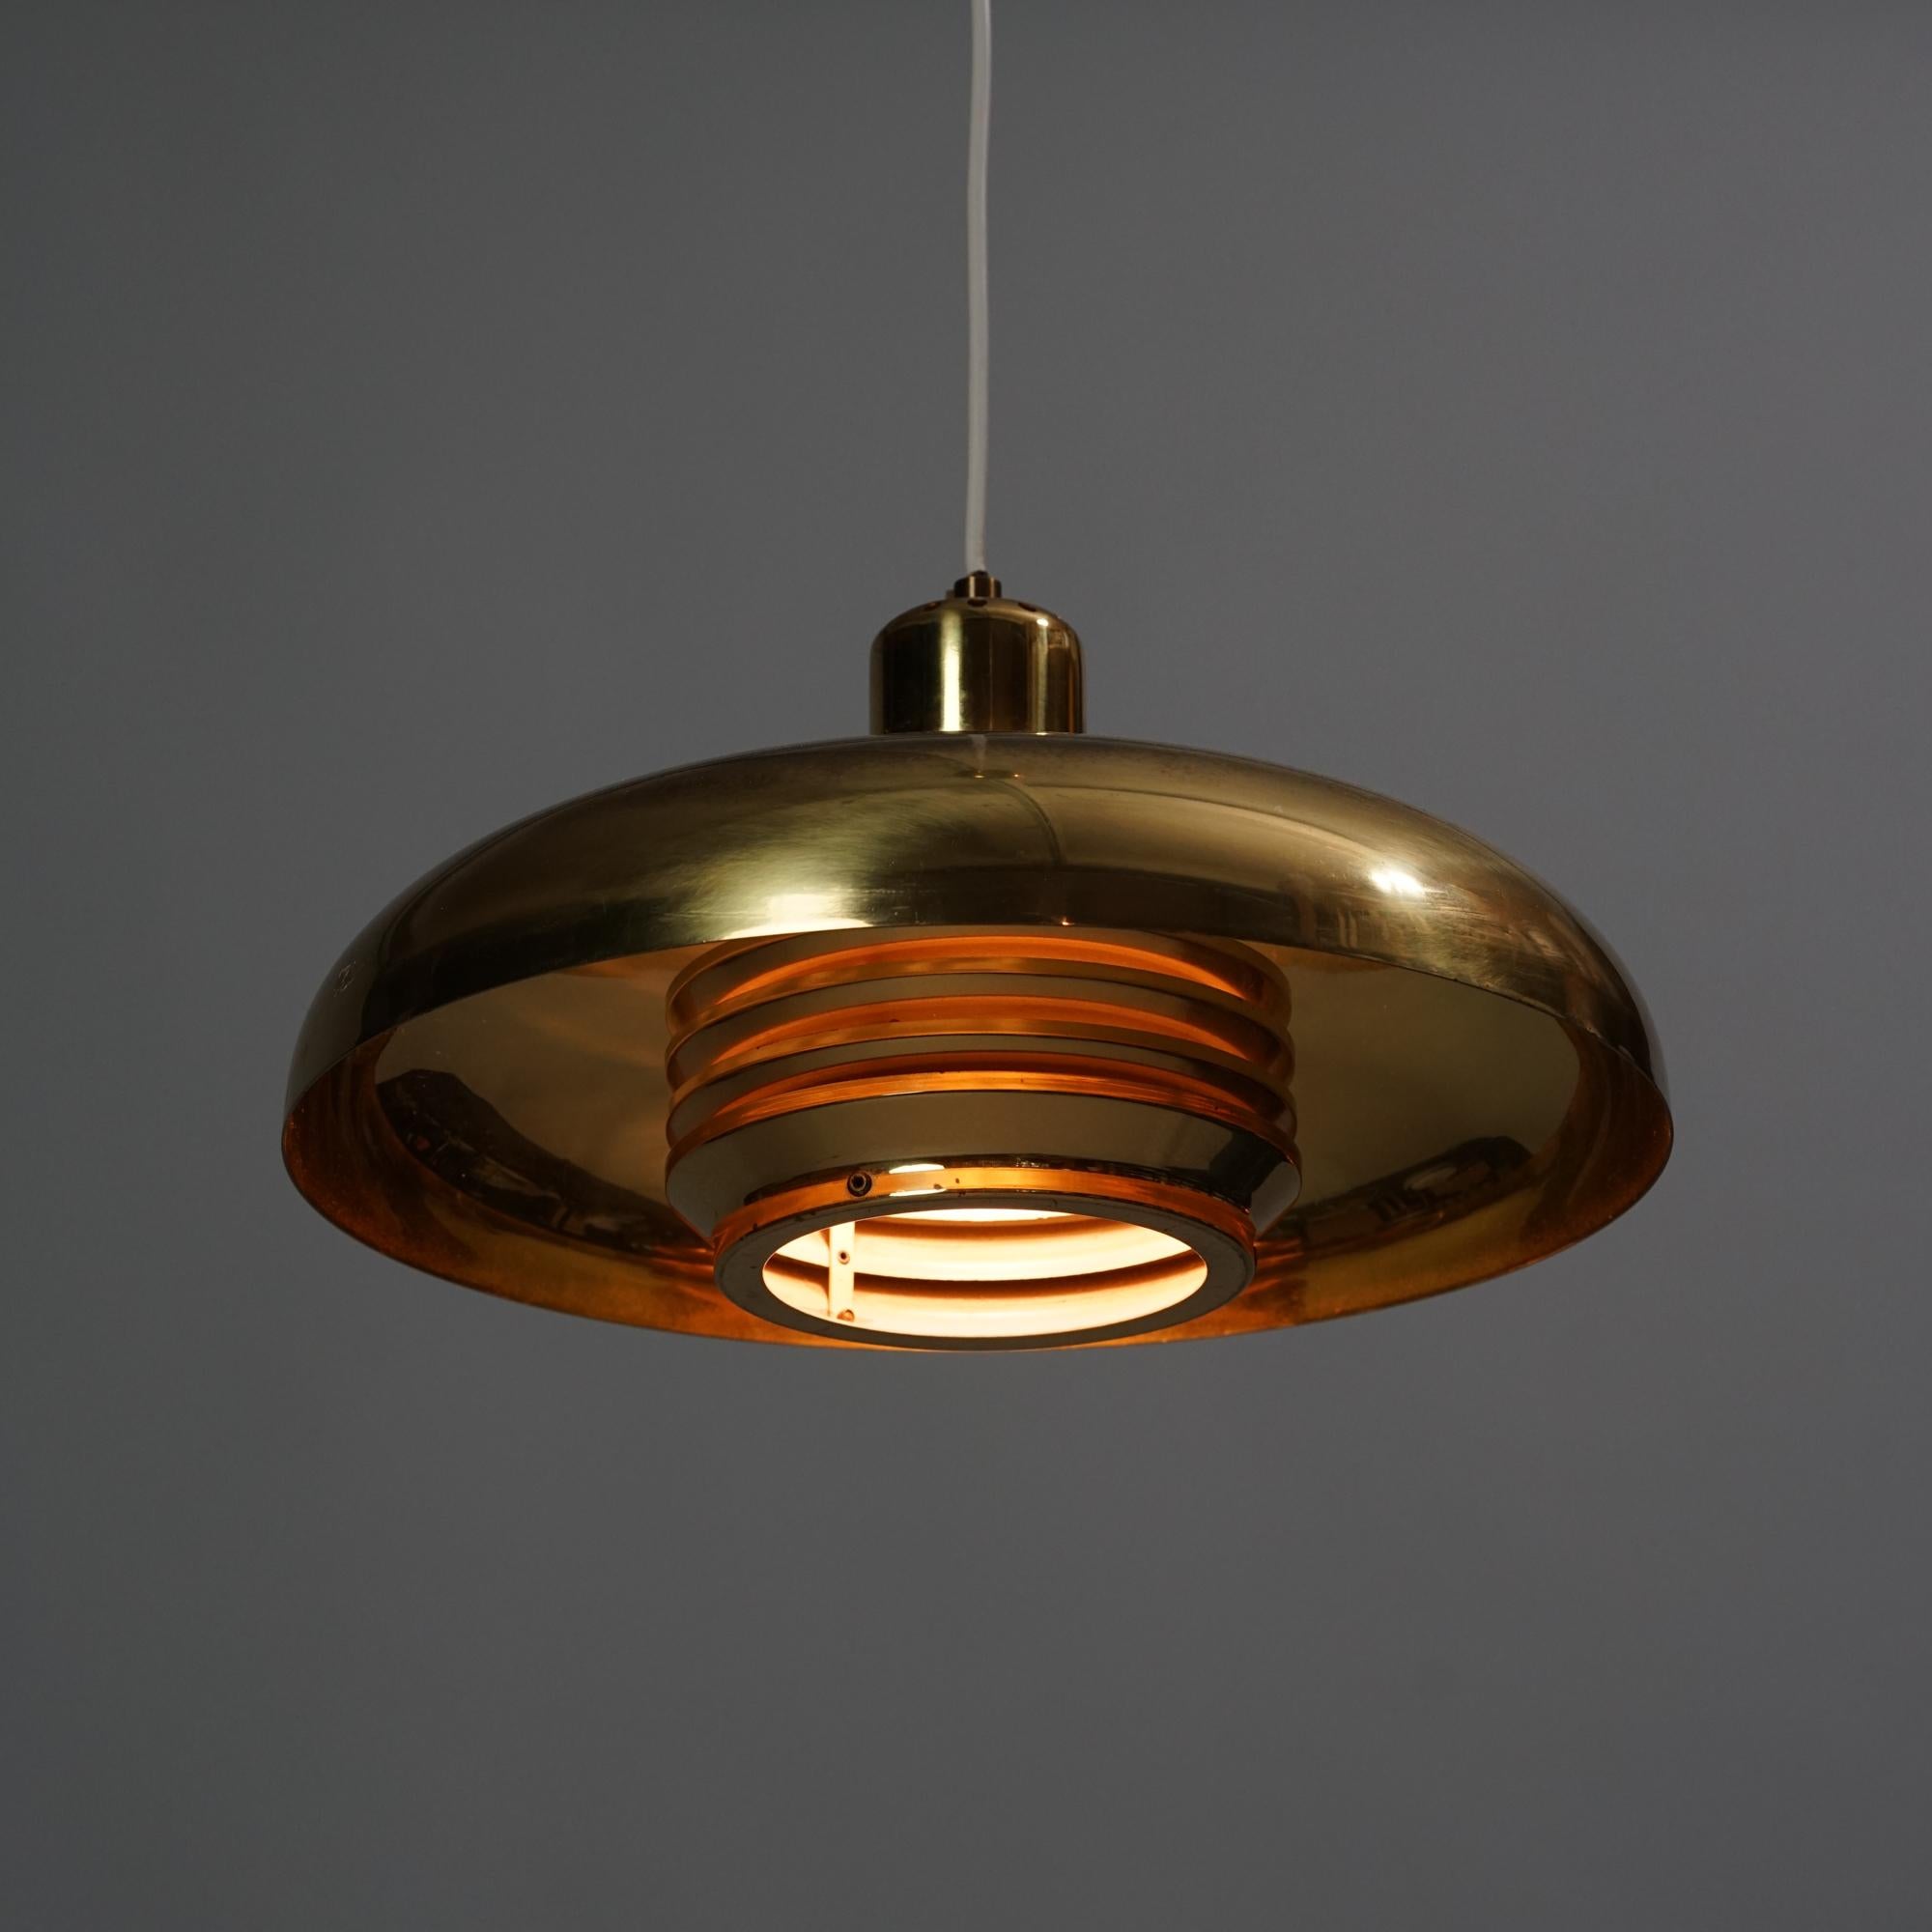 Hans-Agne Jakobsson pendant model T-792 for AB Markaryd from the 1960s. Brass. Good vintage condition, minor patina and wear consistent with age and use. Classic Scandinavian Modern design.

Hans-Agne Jakobsson (1919-2009) was a Swedish furniture